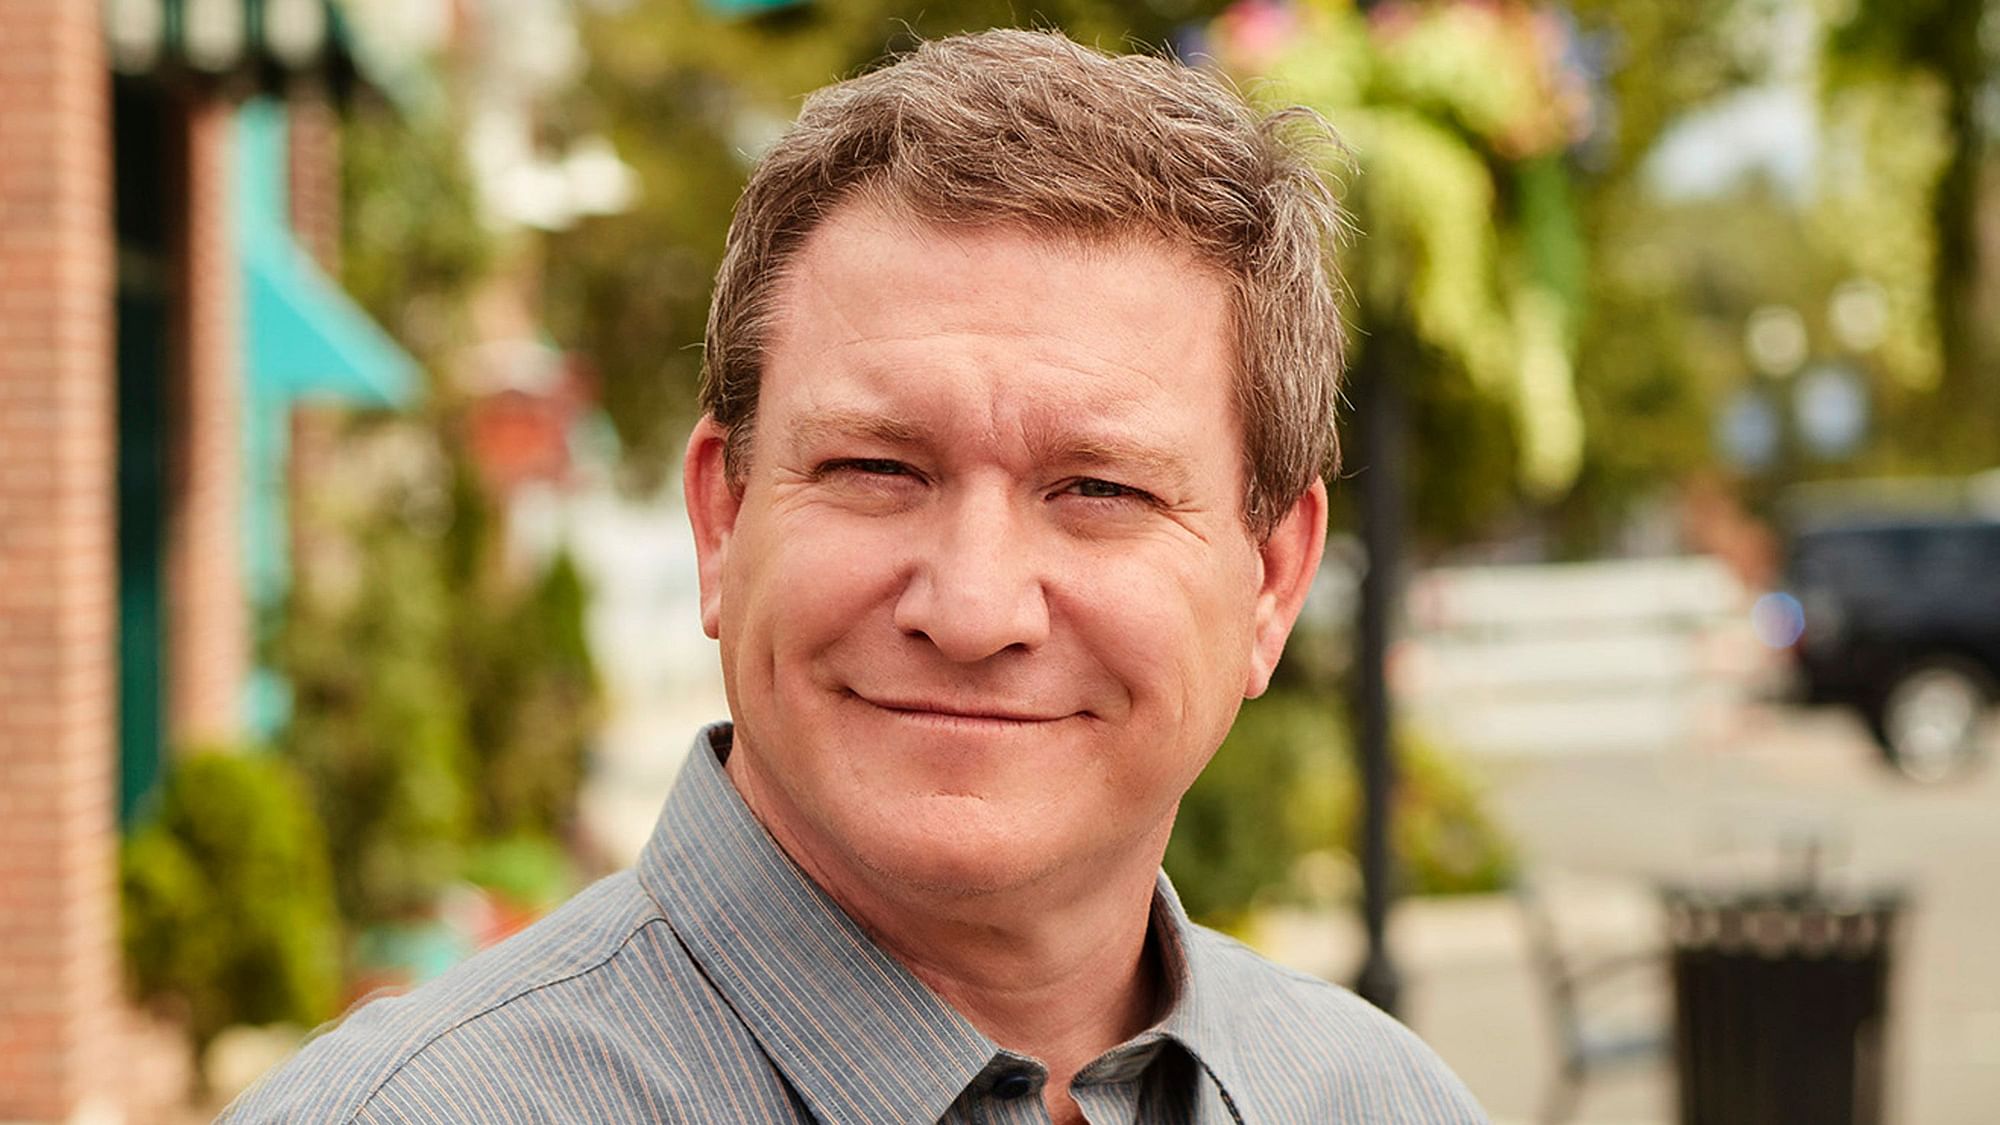 Actor Stoney Westmoreland played the character of Ham on the Disney show ‘Andi Mack’.